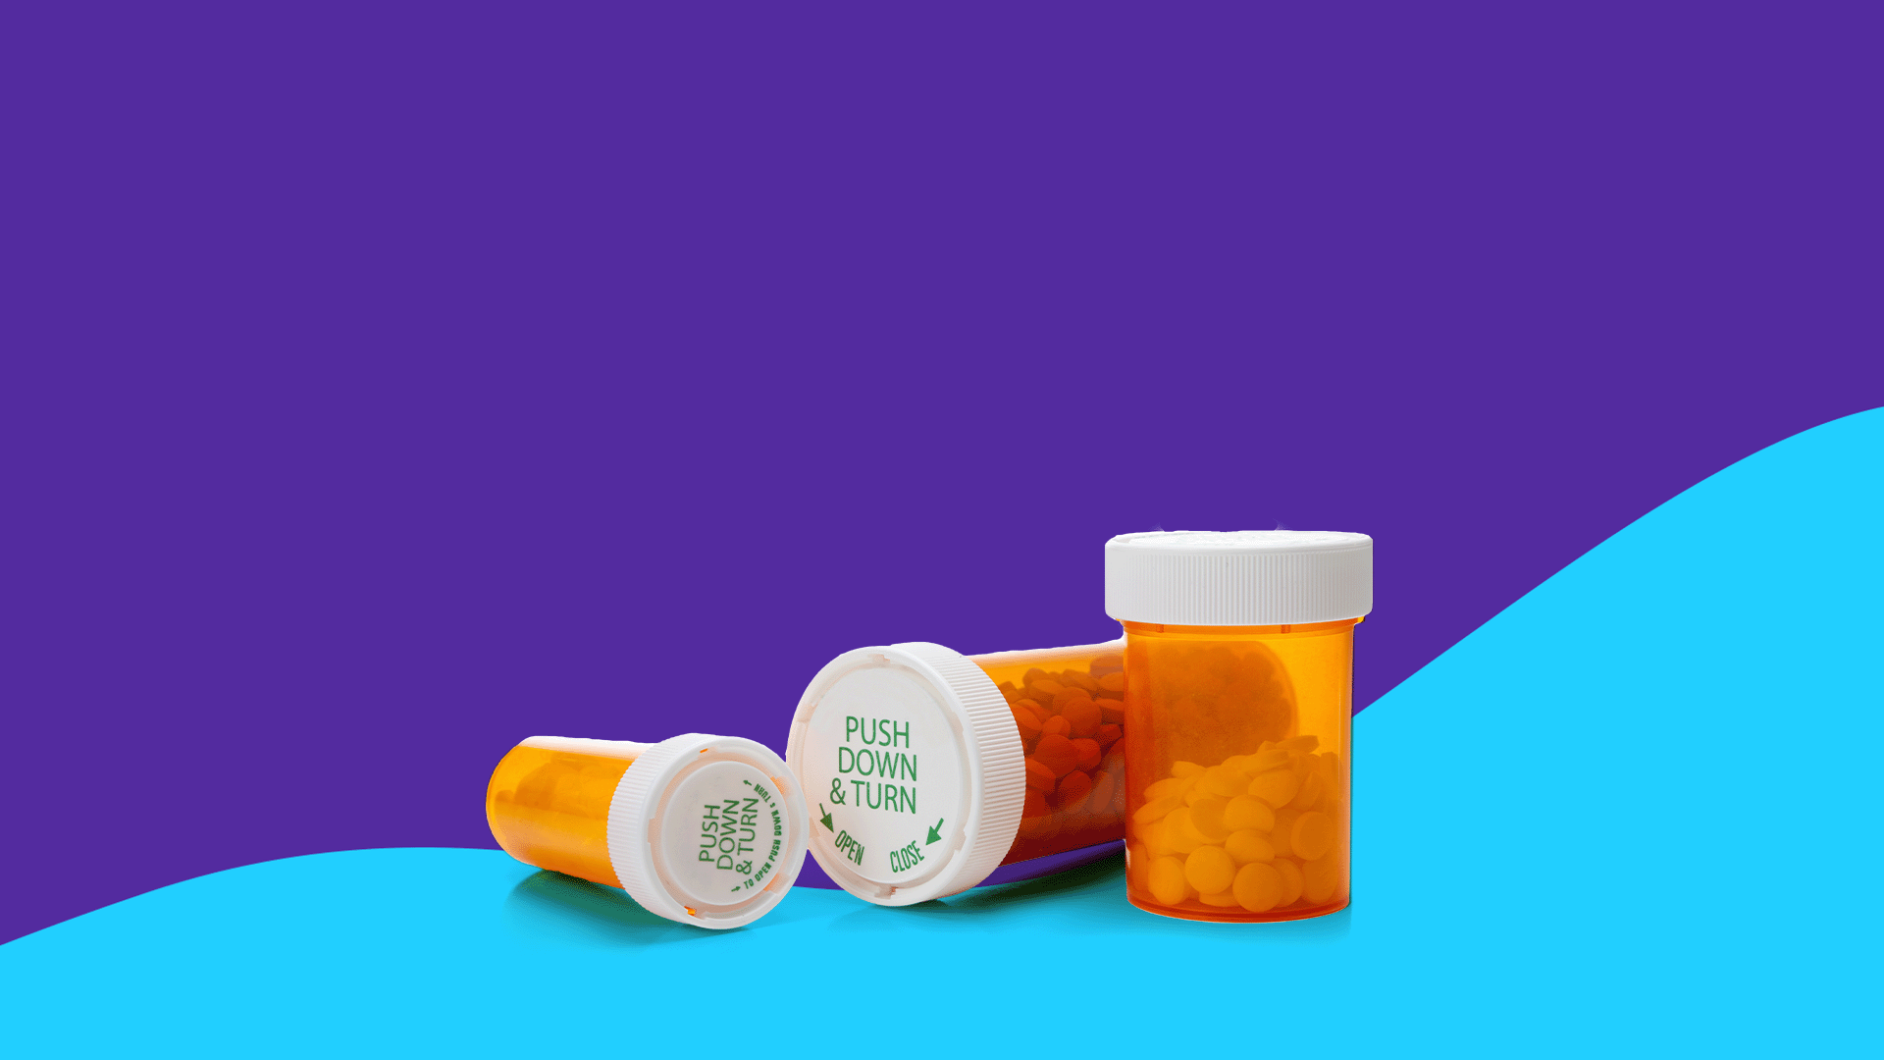 Rx pill bottles: What can I take instead of donepezil?